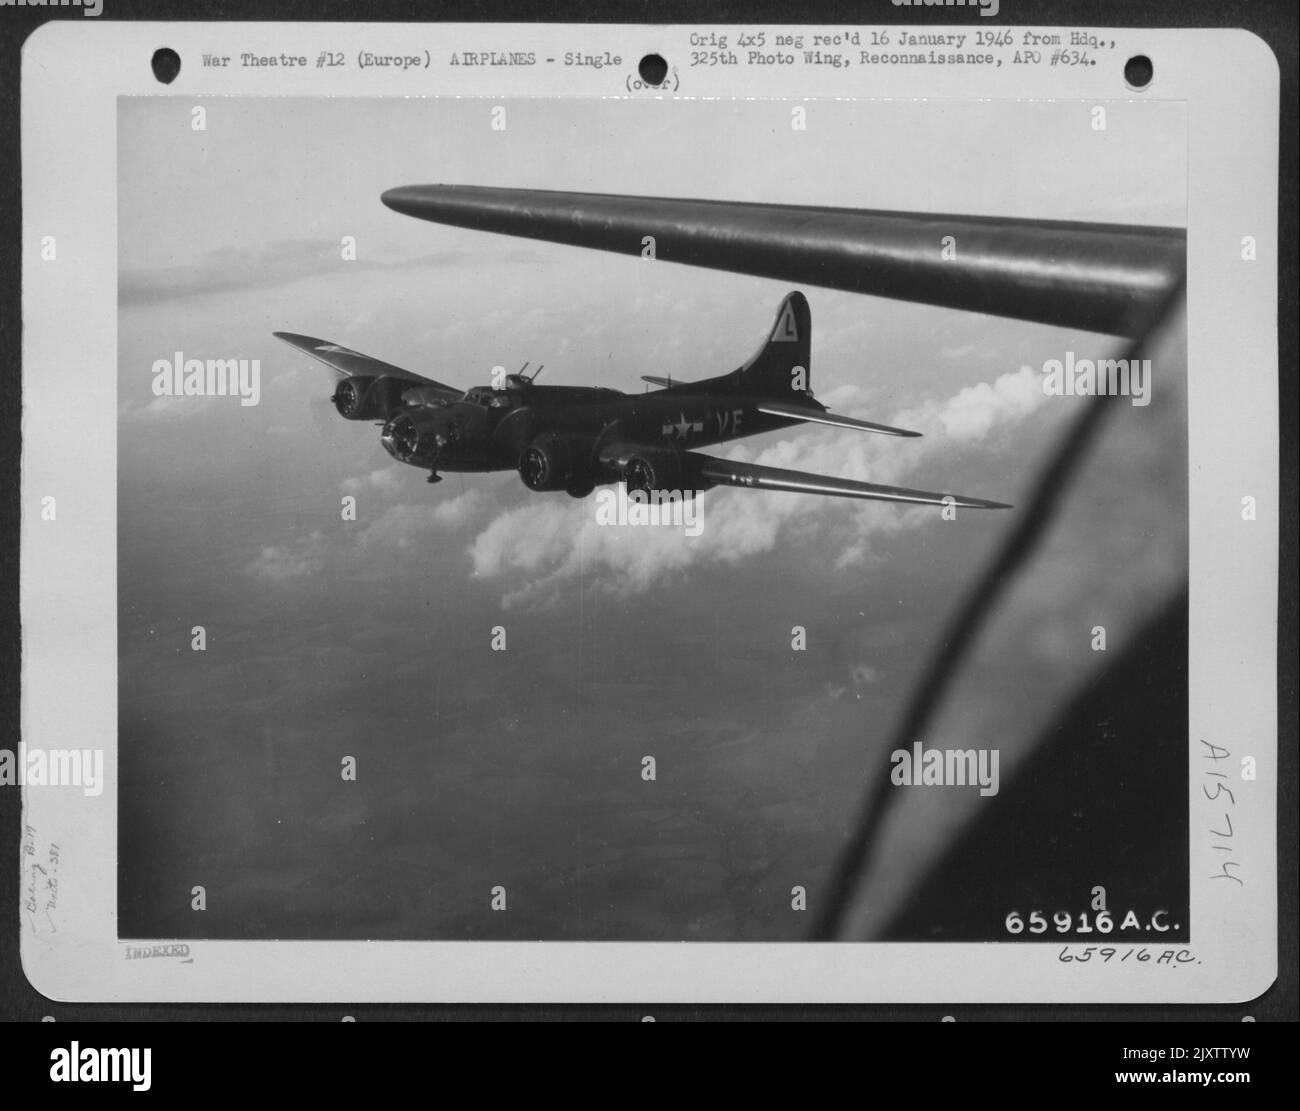 Framed By The Wing Of A Sister Plane, A Boeing B-17 'Flying Fortress' Of The 381St Bomb Group Presents A Pretty Picture As It Drones On Toward The Target In Europe. Stock Photo